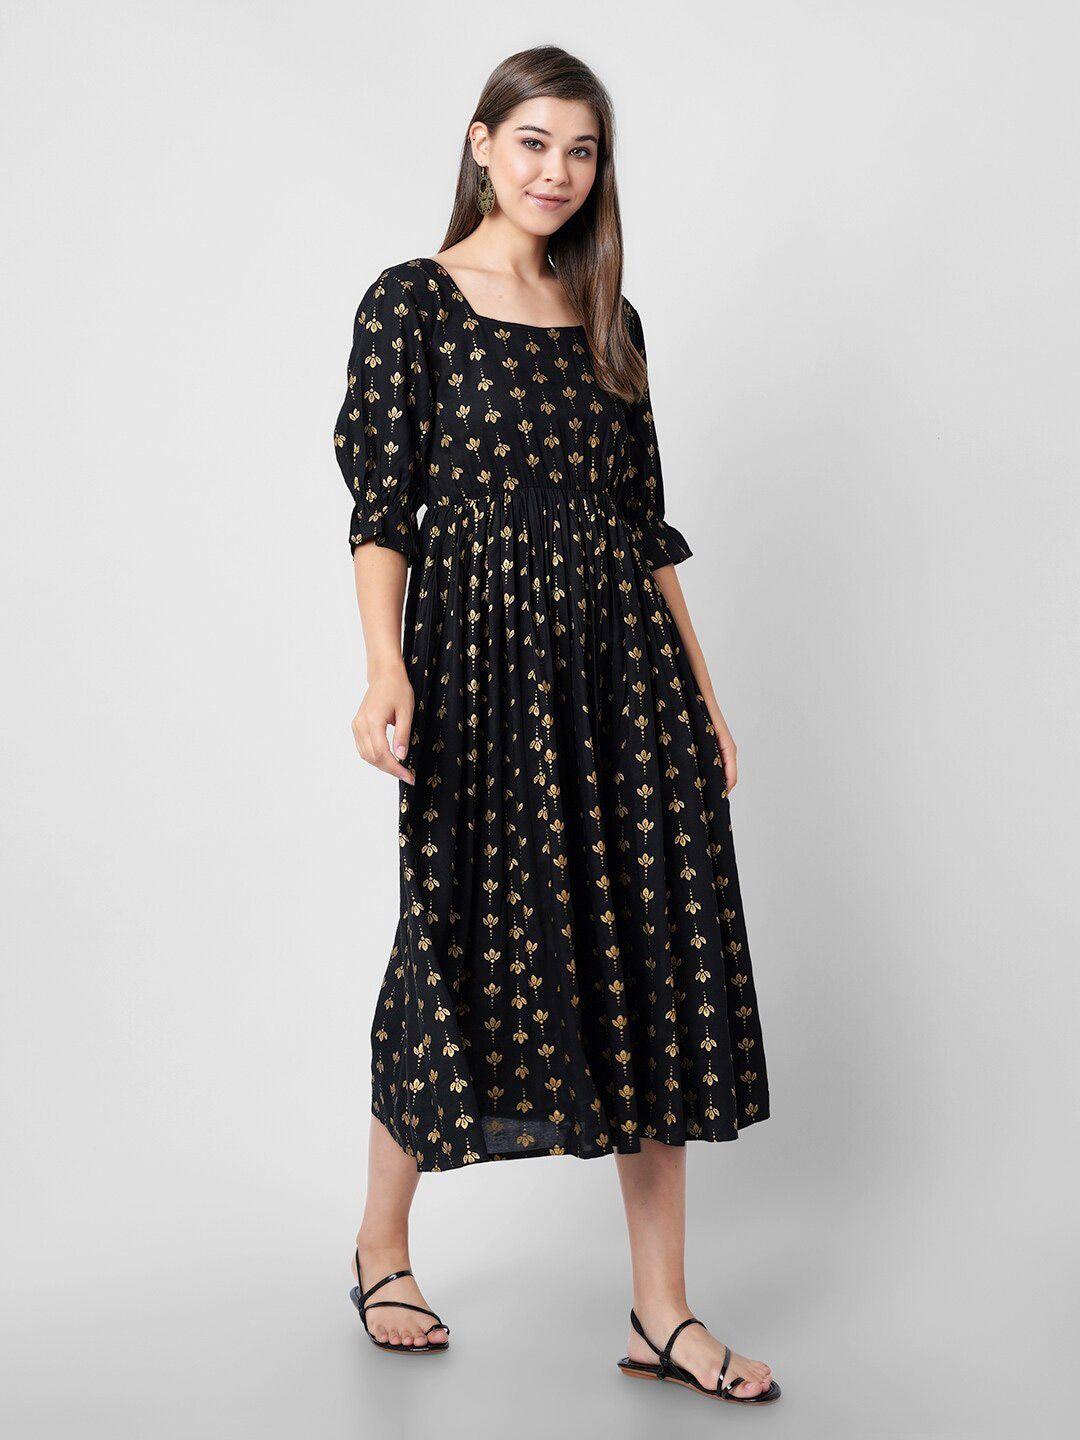 indianic floral print puff sleeve fit & flare midi dress